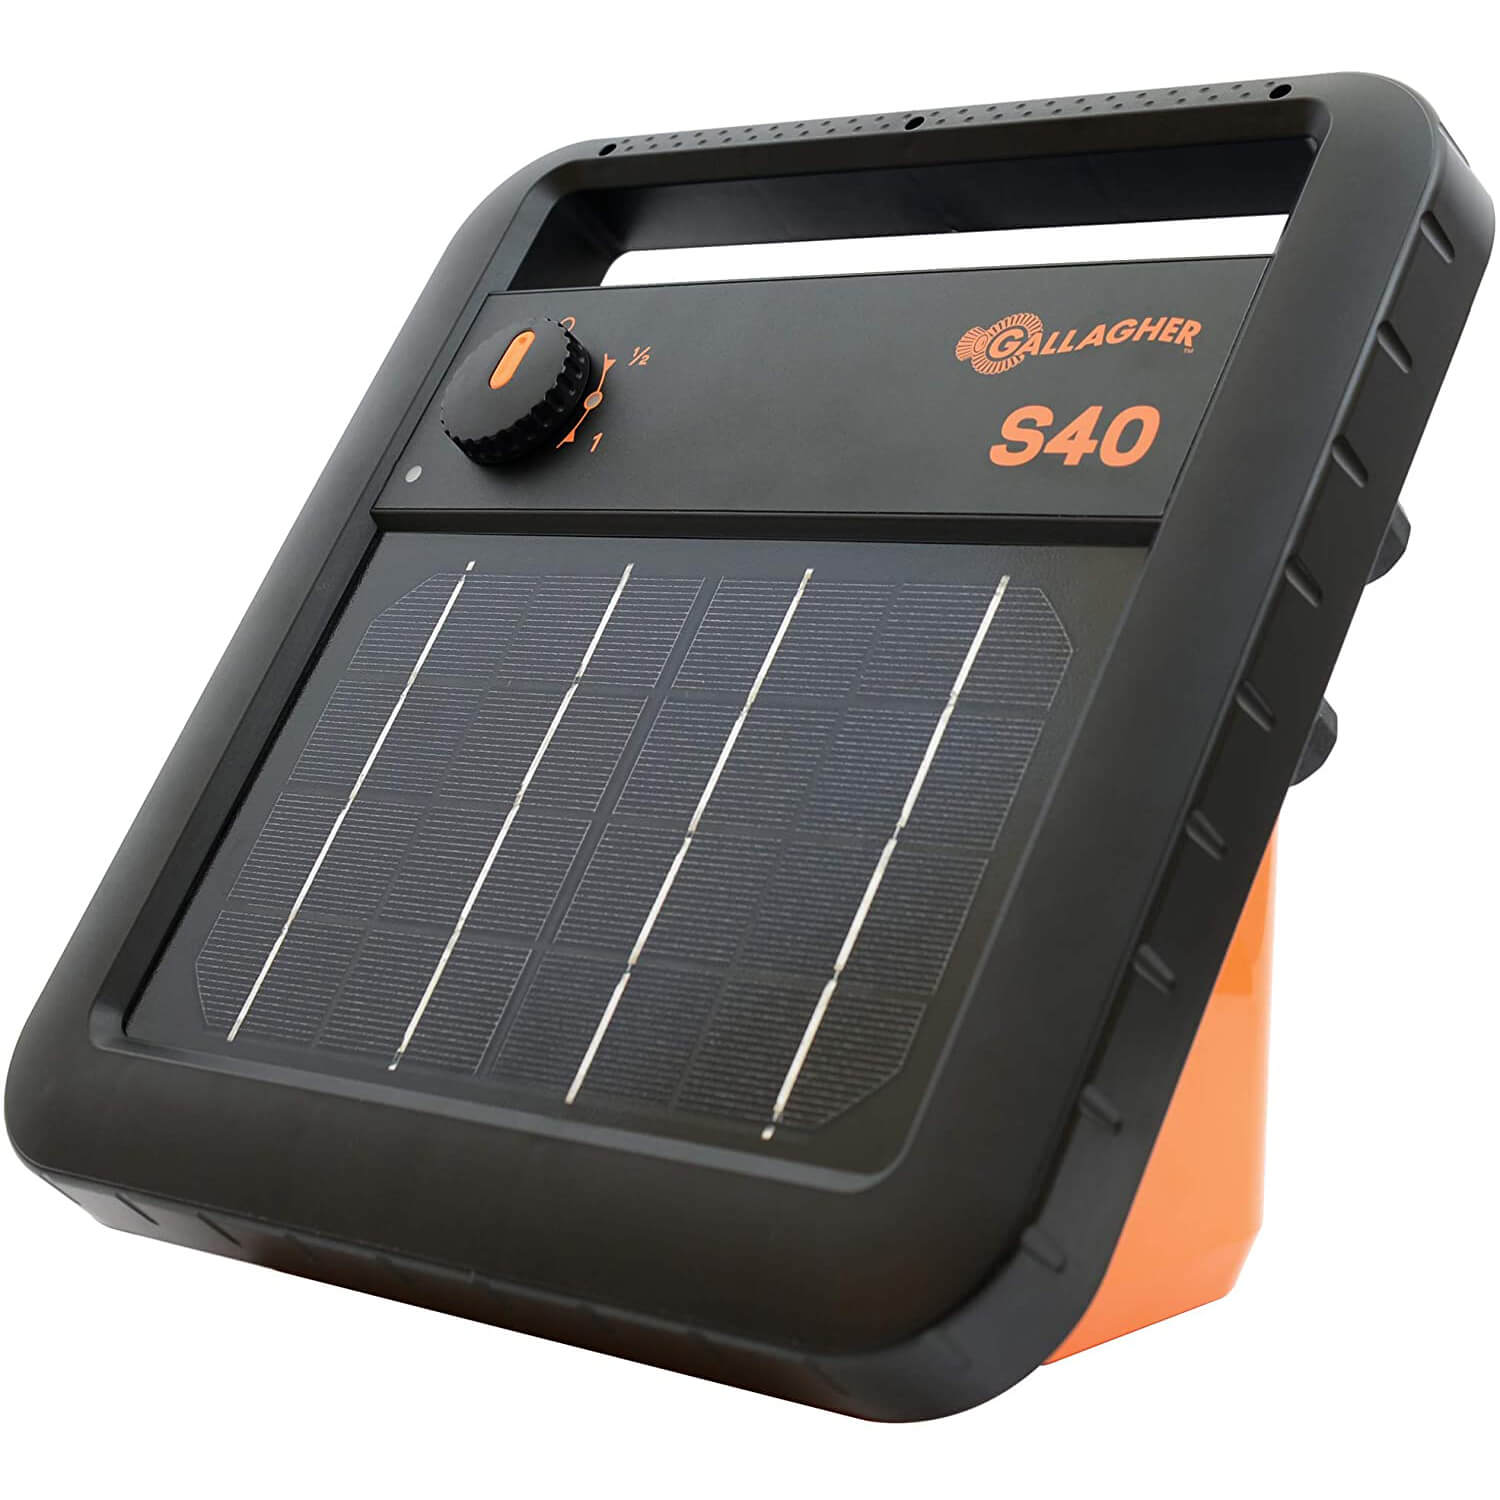 Gallagher S40 Solar Electric Fence Charger